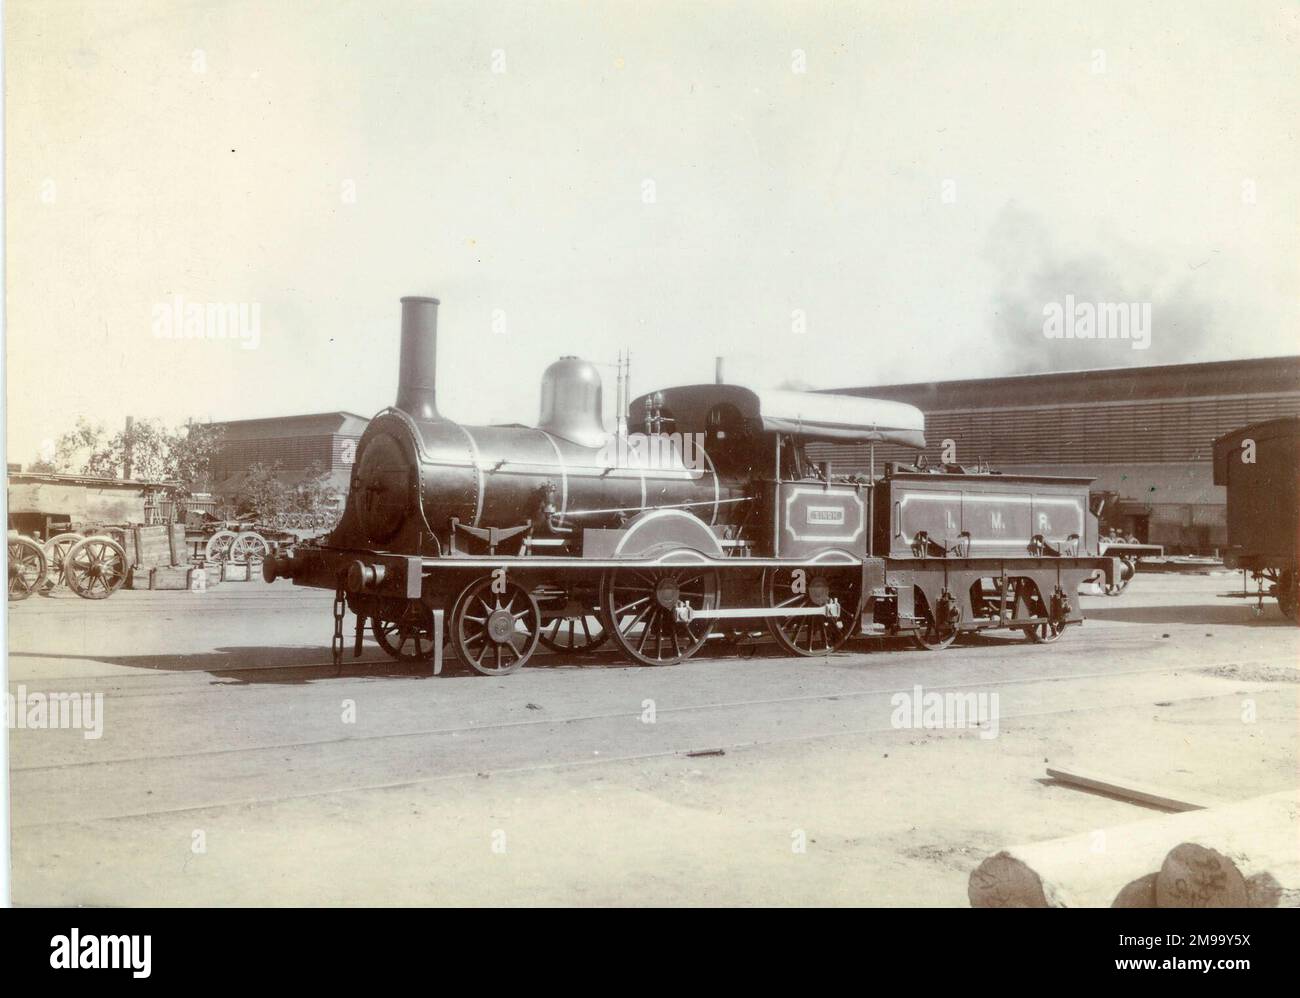 Sindh, 2-4-0 locomotive. Inscribed verso 'Old GIPR 4 passenger engine built by Kitson in 18- and sold to old IMRy [Indian Midland Railway] in - Since reverted to GIPR'. Stock Photo